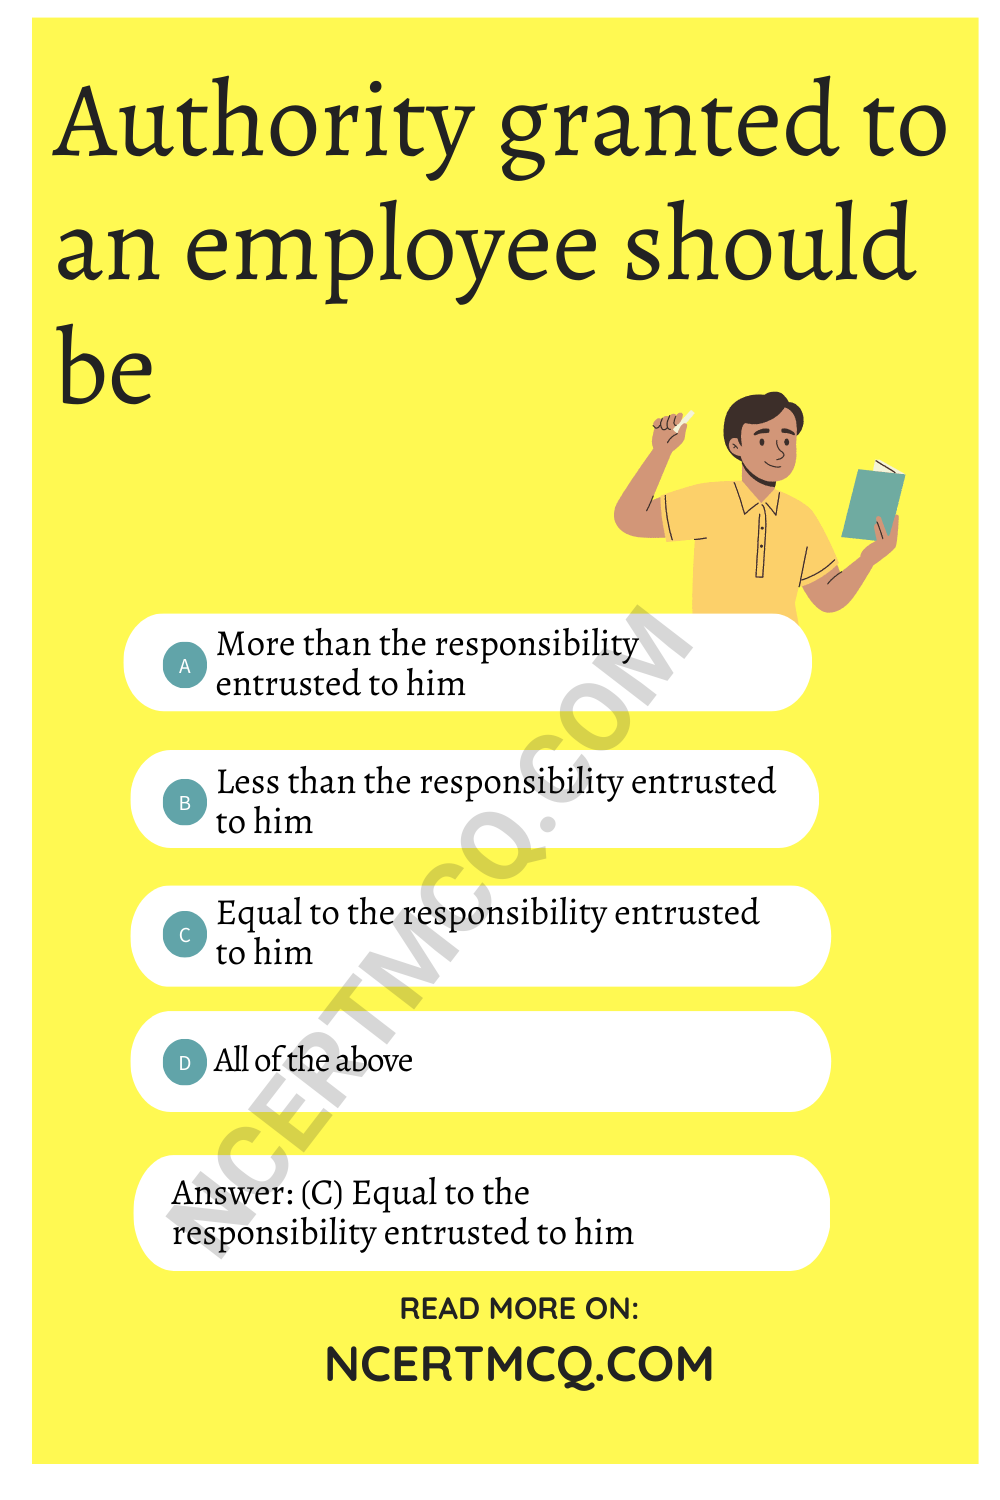 Authority granted to an employee should be